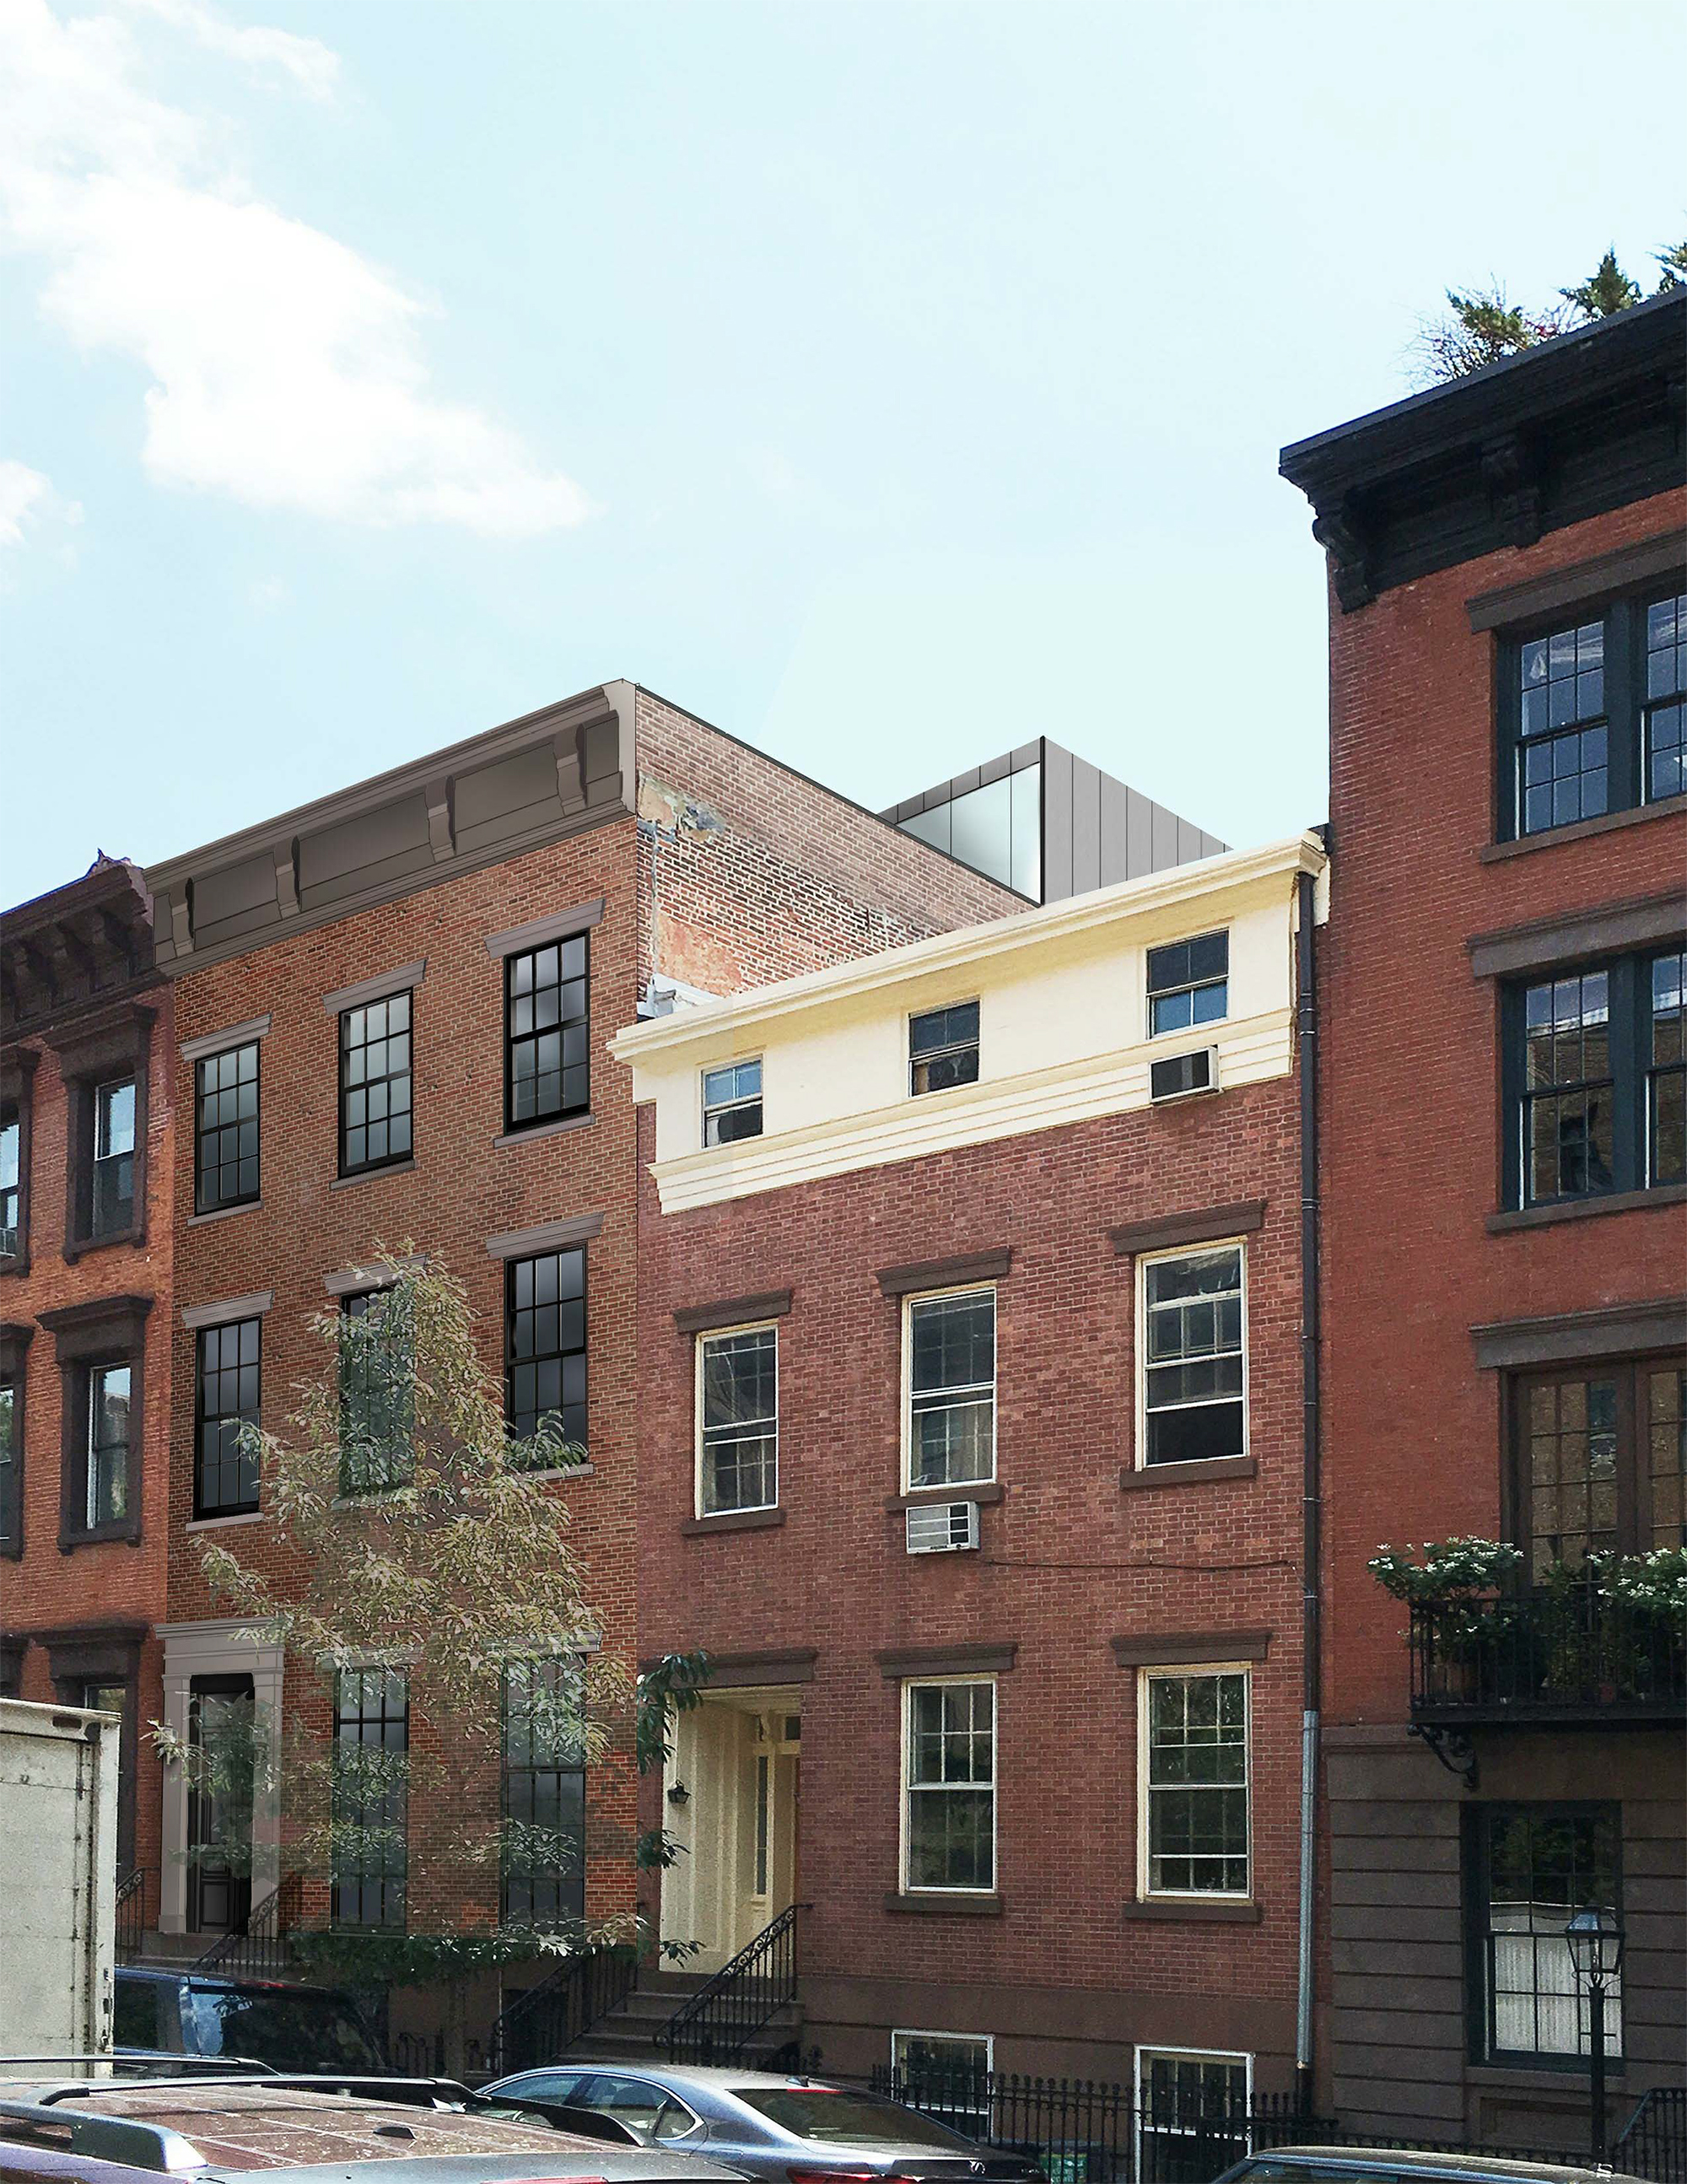 Proposal for 442 West 22nd Street, seen at left